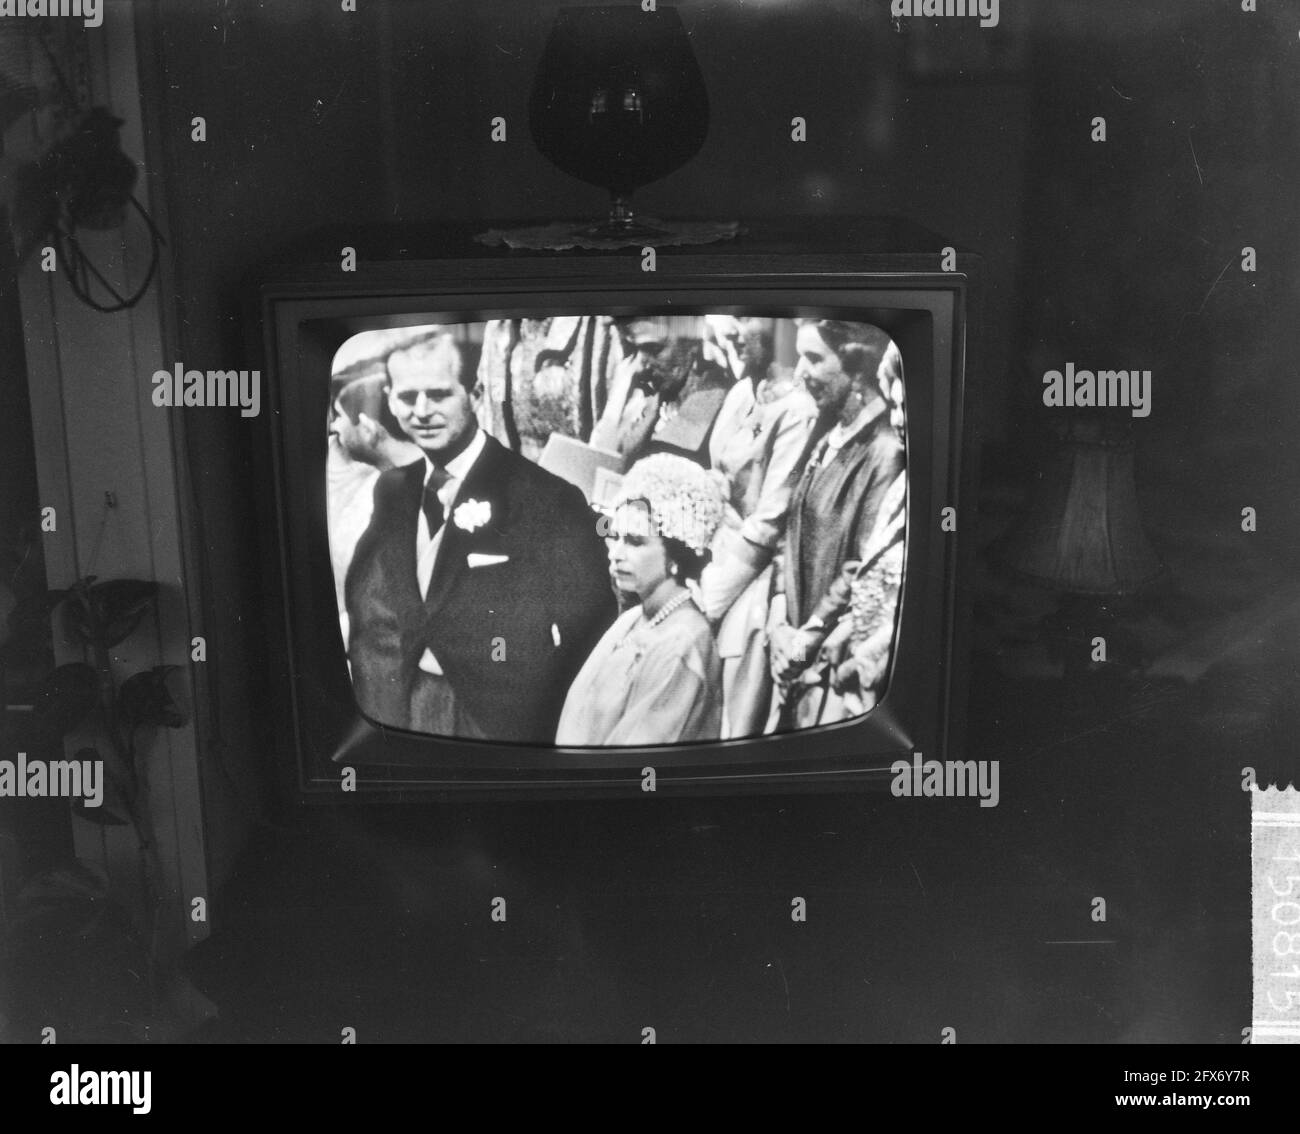 Marriage Alexandra of Kent to Angus Ogilvy at Westminster Abbey, London [photo from TV]. Prince Philip (left) and Queen Elizabeth, April 24, 1963, gentry, marriages, The Netherlands, 20th century press agency photo, news to remember, documentary, historic photography 1945-1990, visual stories, human history of the Twentieth Century, capturing moments in time Stock Photo